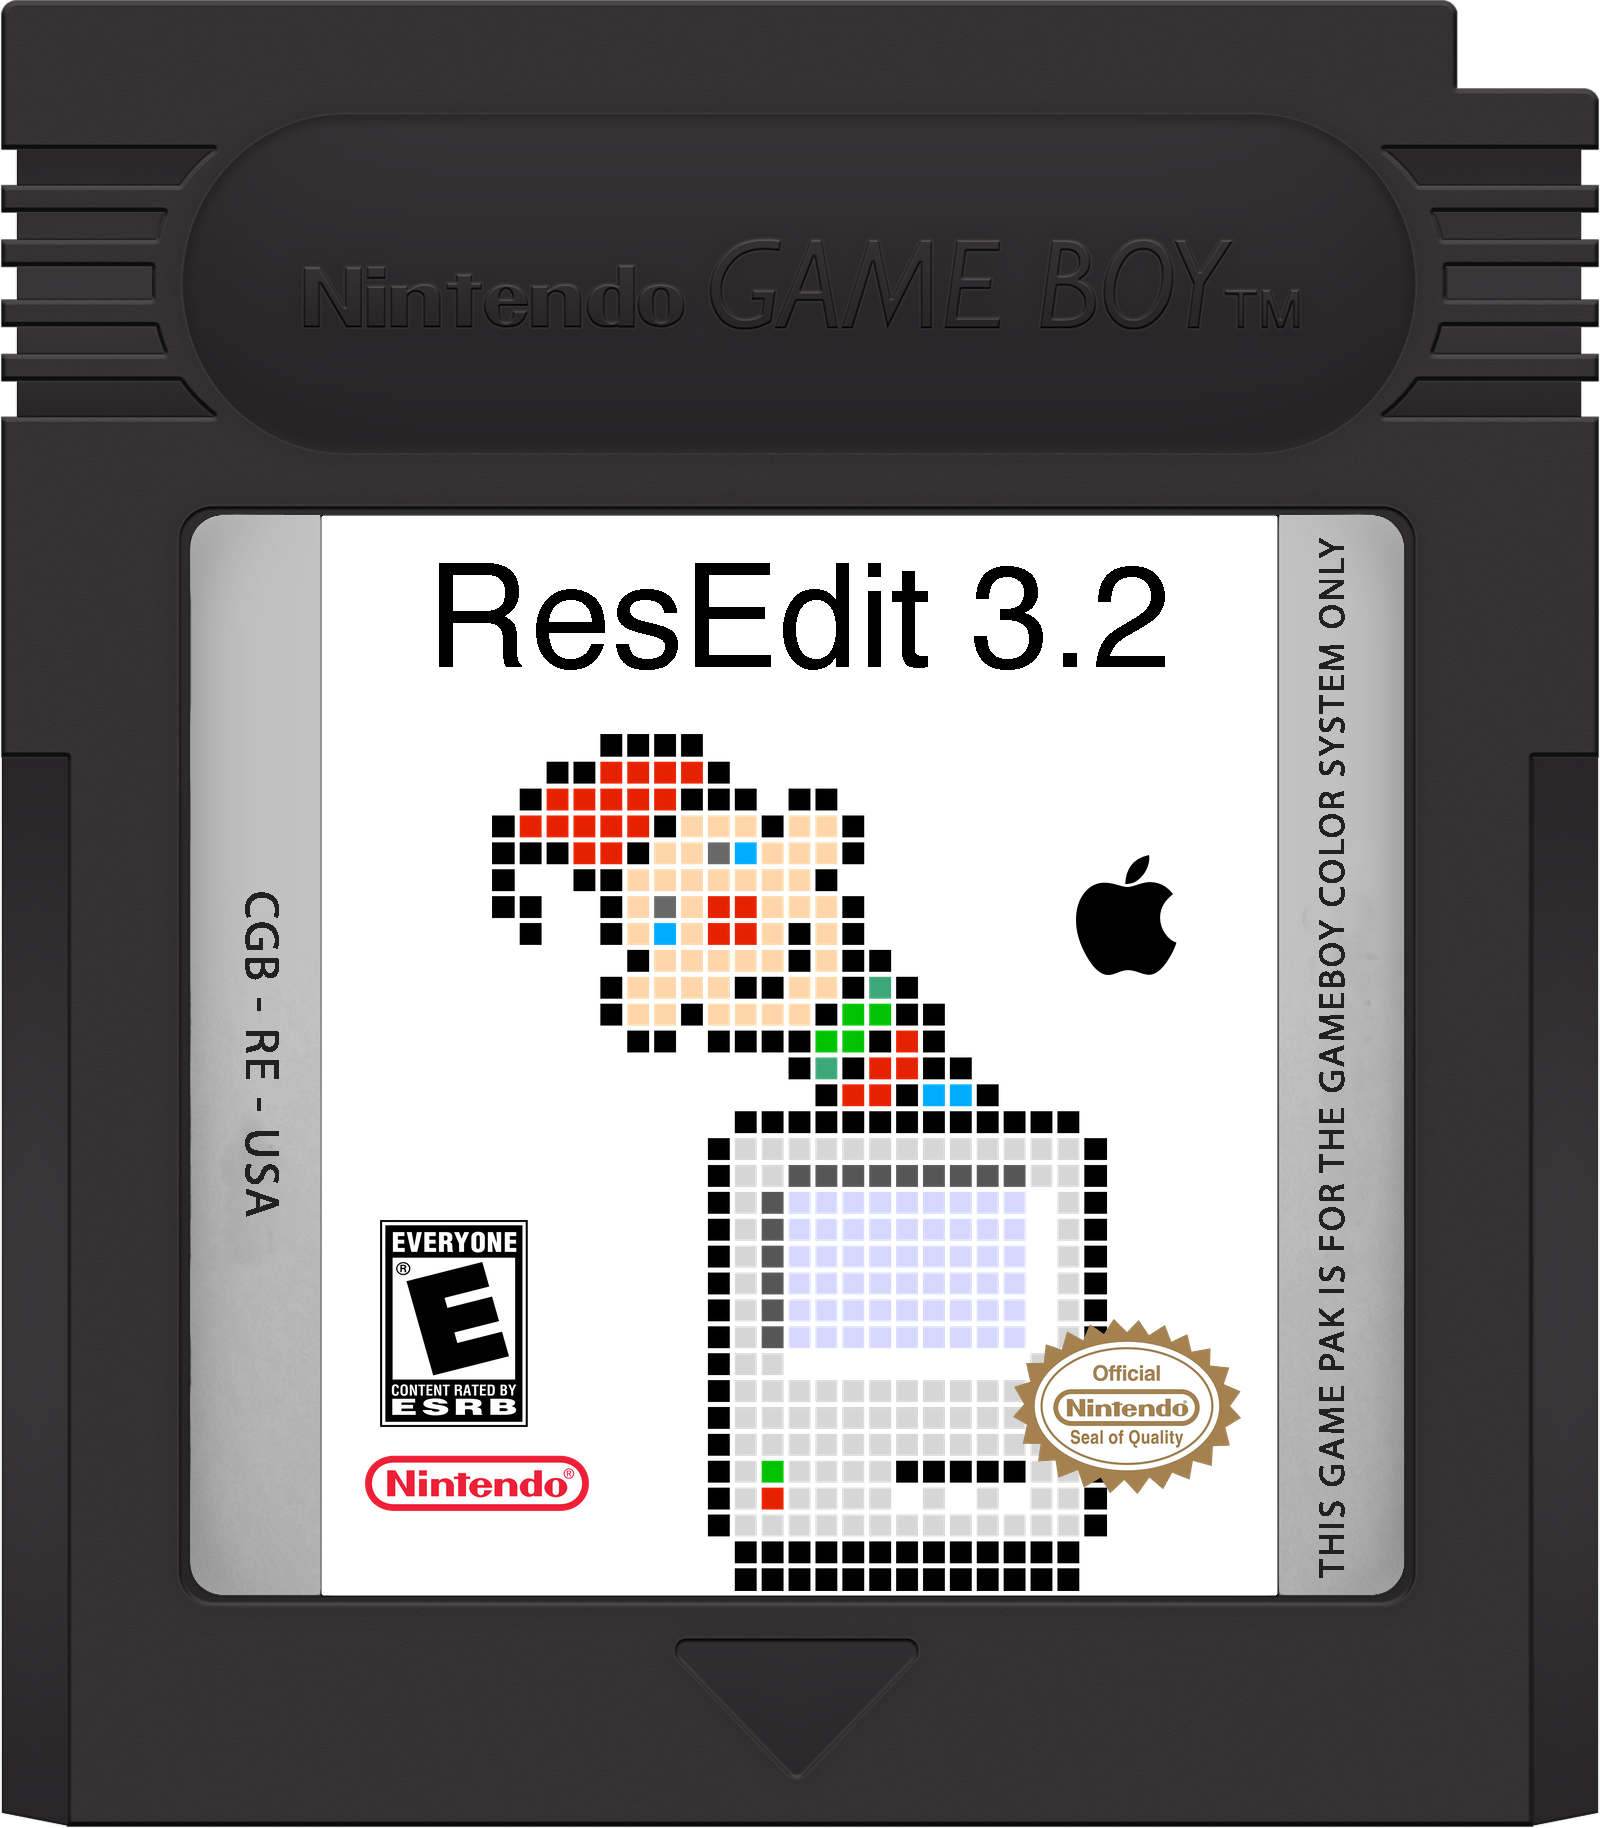 ResEdit 3.2 for the Nintendo Game Boy Color cartridge